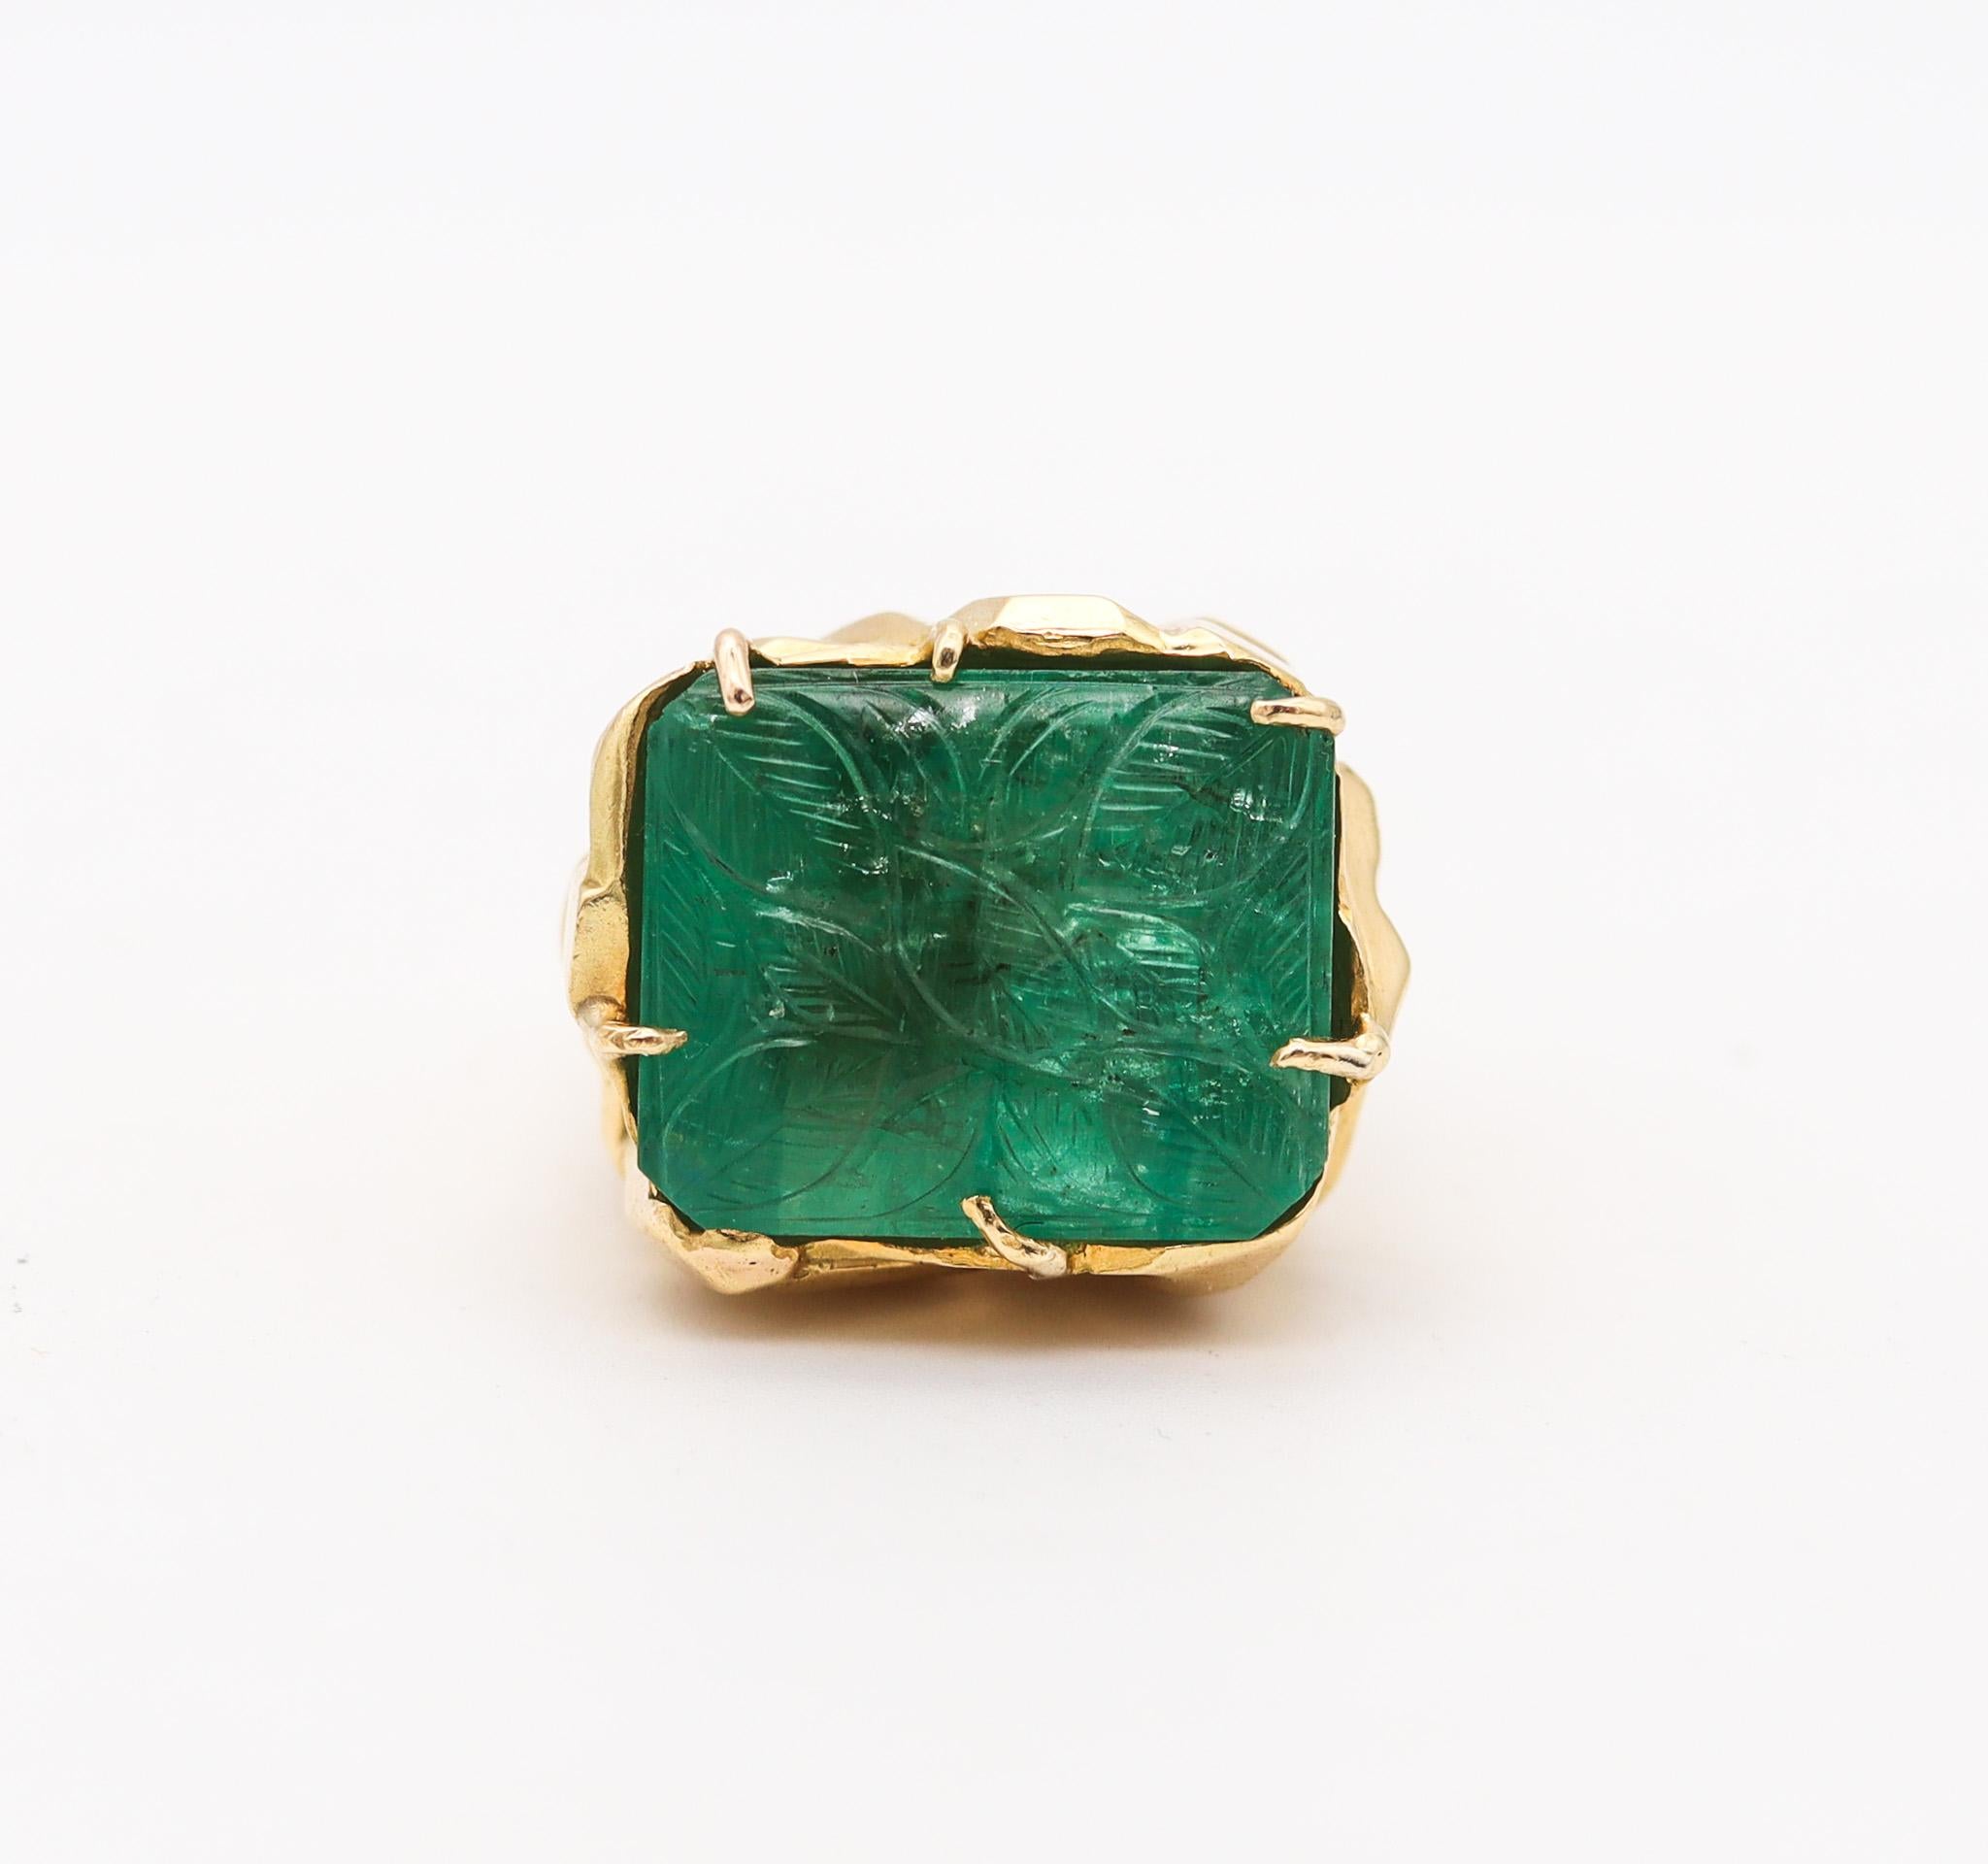 Arthur King 1970 Geometric Sculptural Ring In 18Kt Gold With 12.45 Cts Emerald In Excellent Condition For Sale In Miami, FL